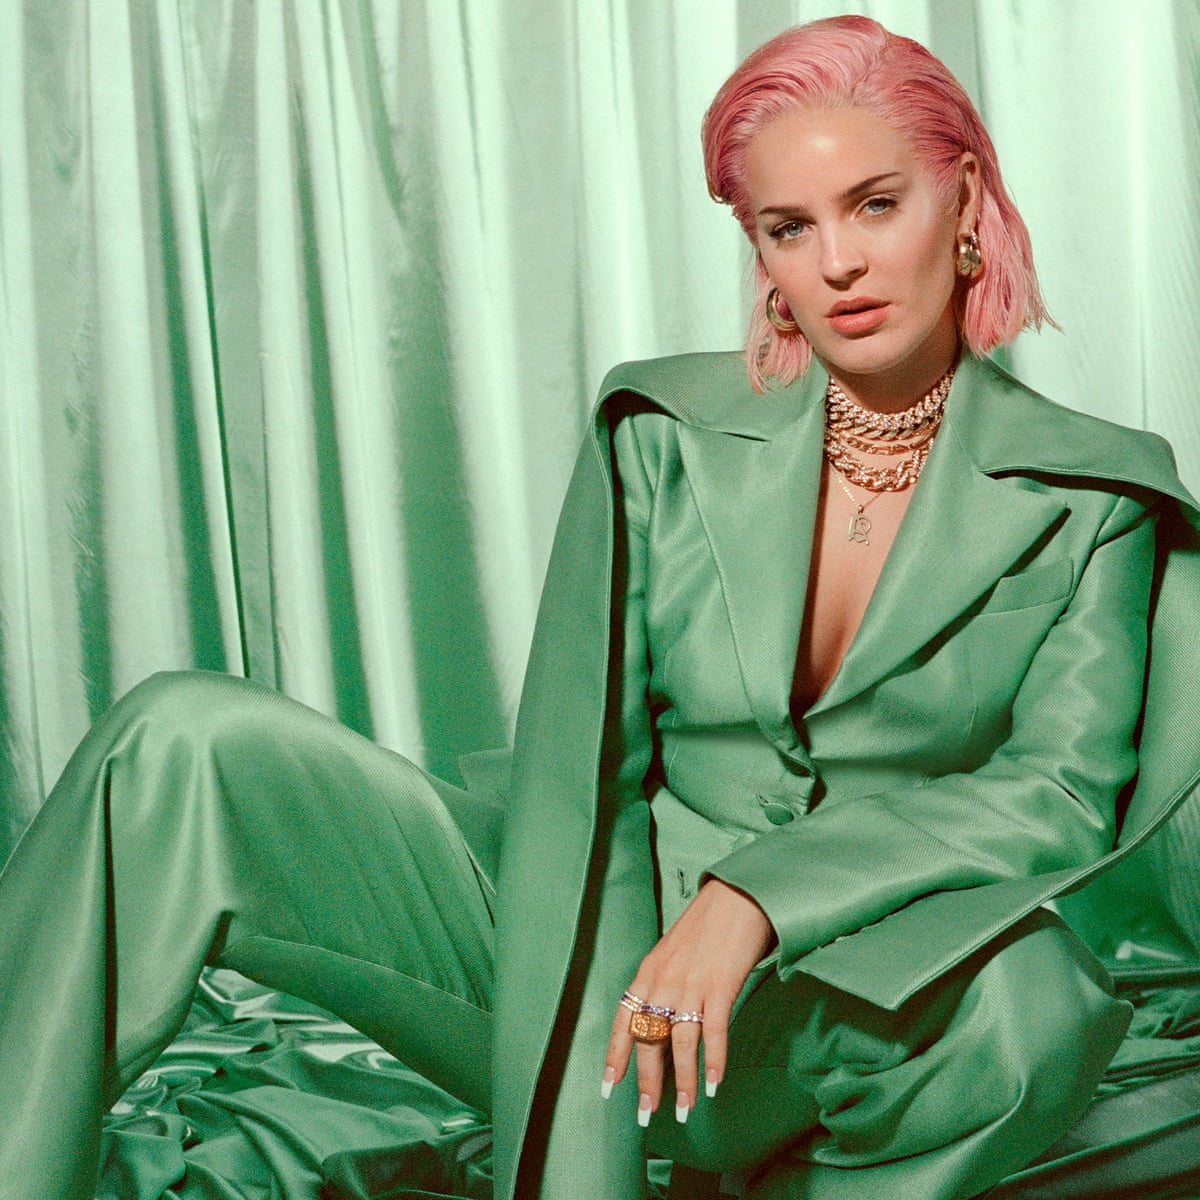 Anne-Marie: 'I just want to make people smile' | Anne-Marie | The Guardian